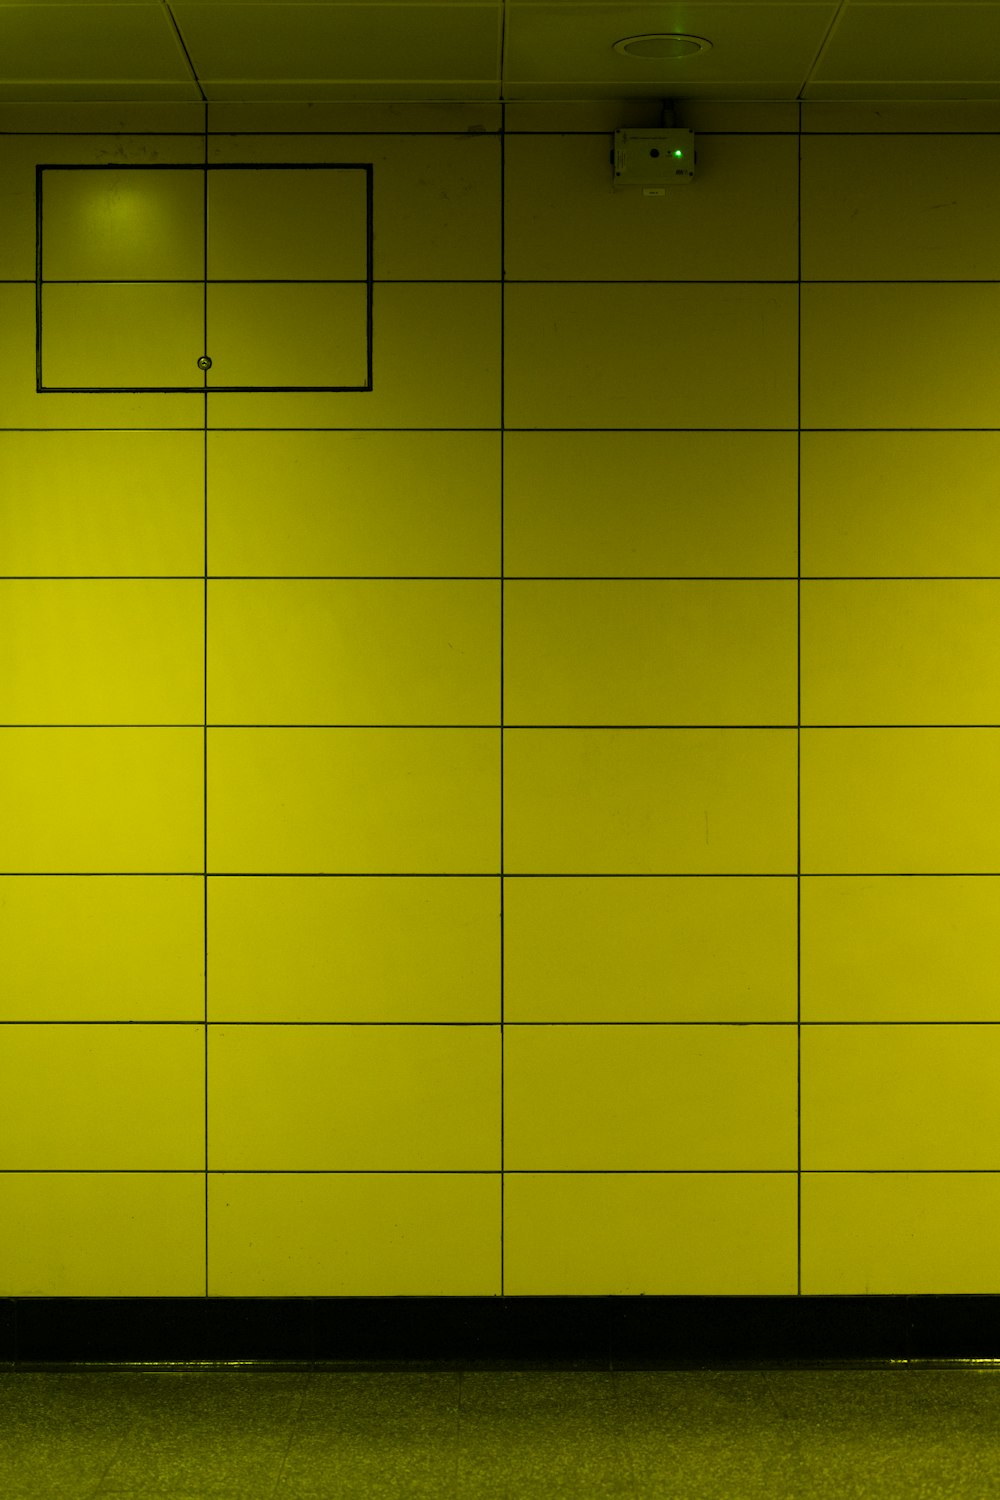 a person sitting on a bench in front of a yellow wall